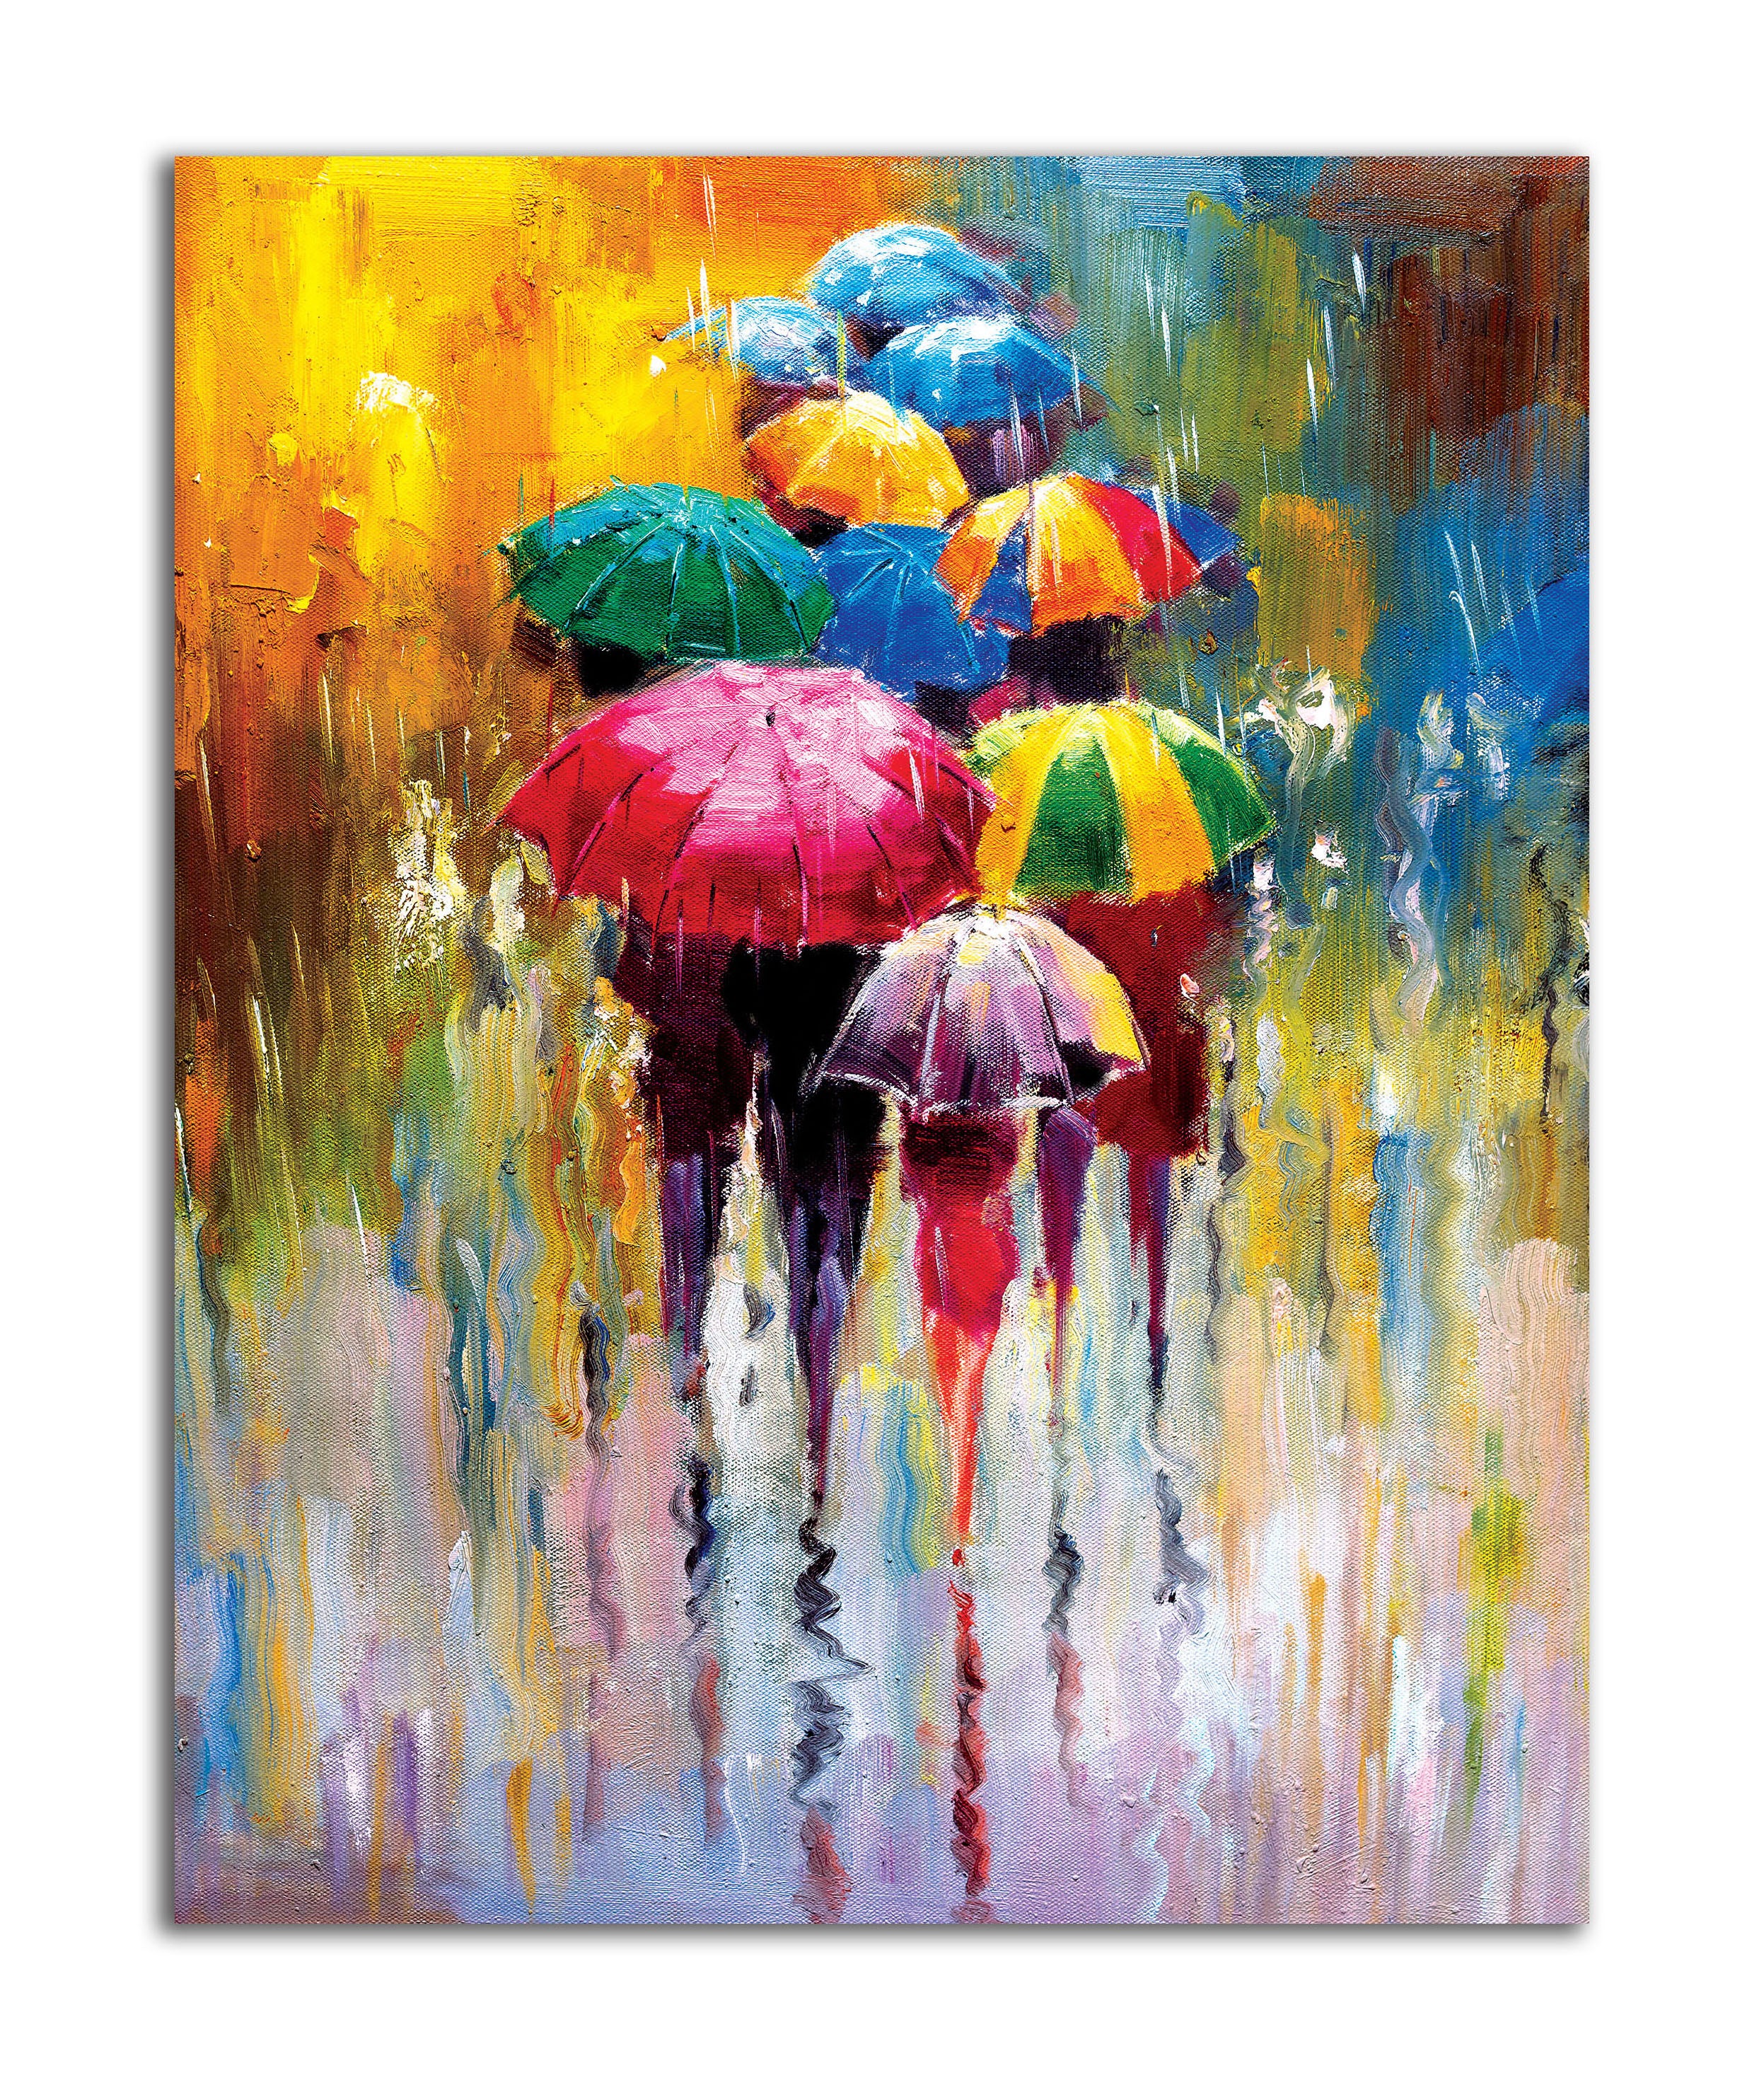 Abstract Umbrella - Unframed Canvas Painting